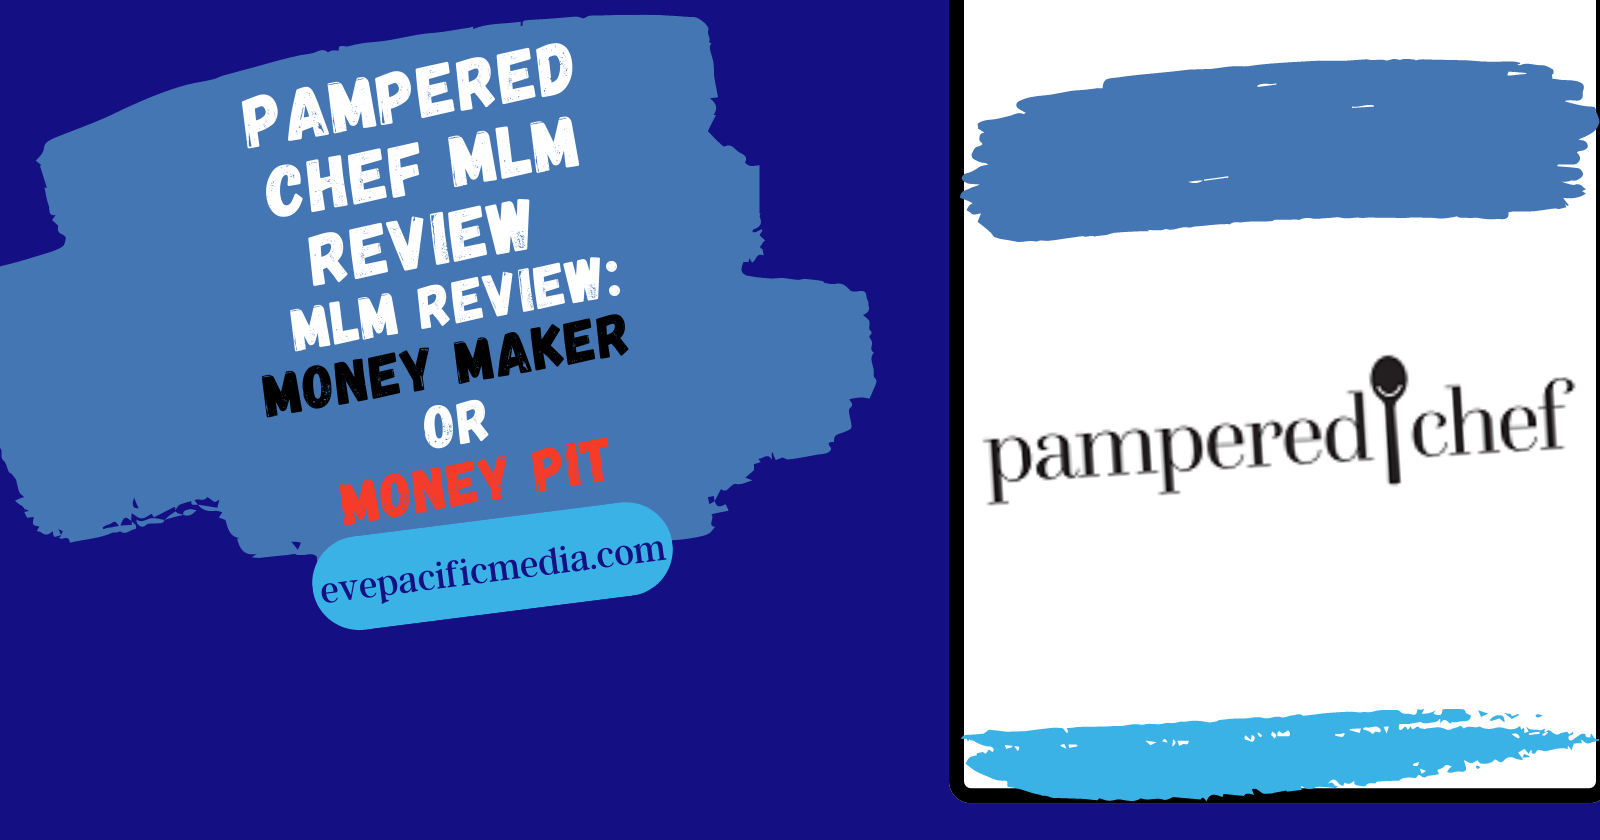 Pampered Chef MLM Review: Money Maker or Money Pit?